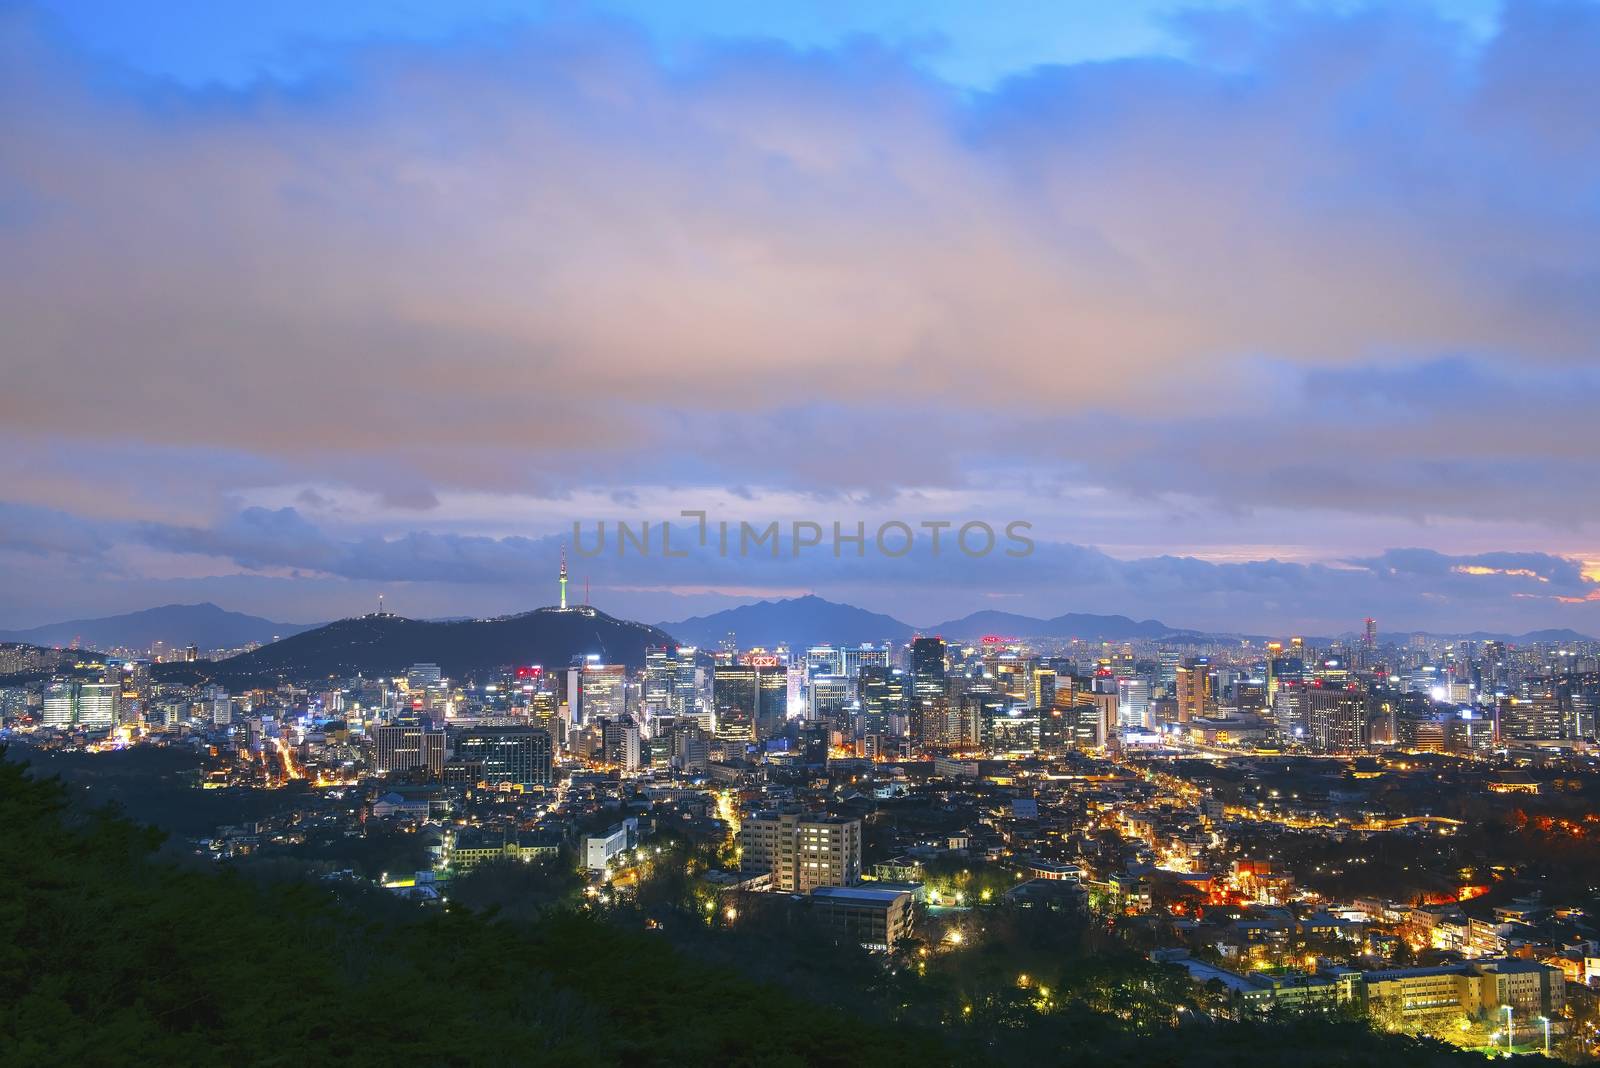 View of downtown cityscape and Seoul tower in Seoul, South Korea by wijitamkapet@gmail.com